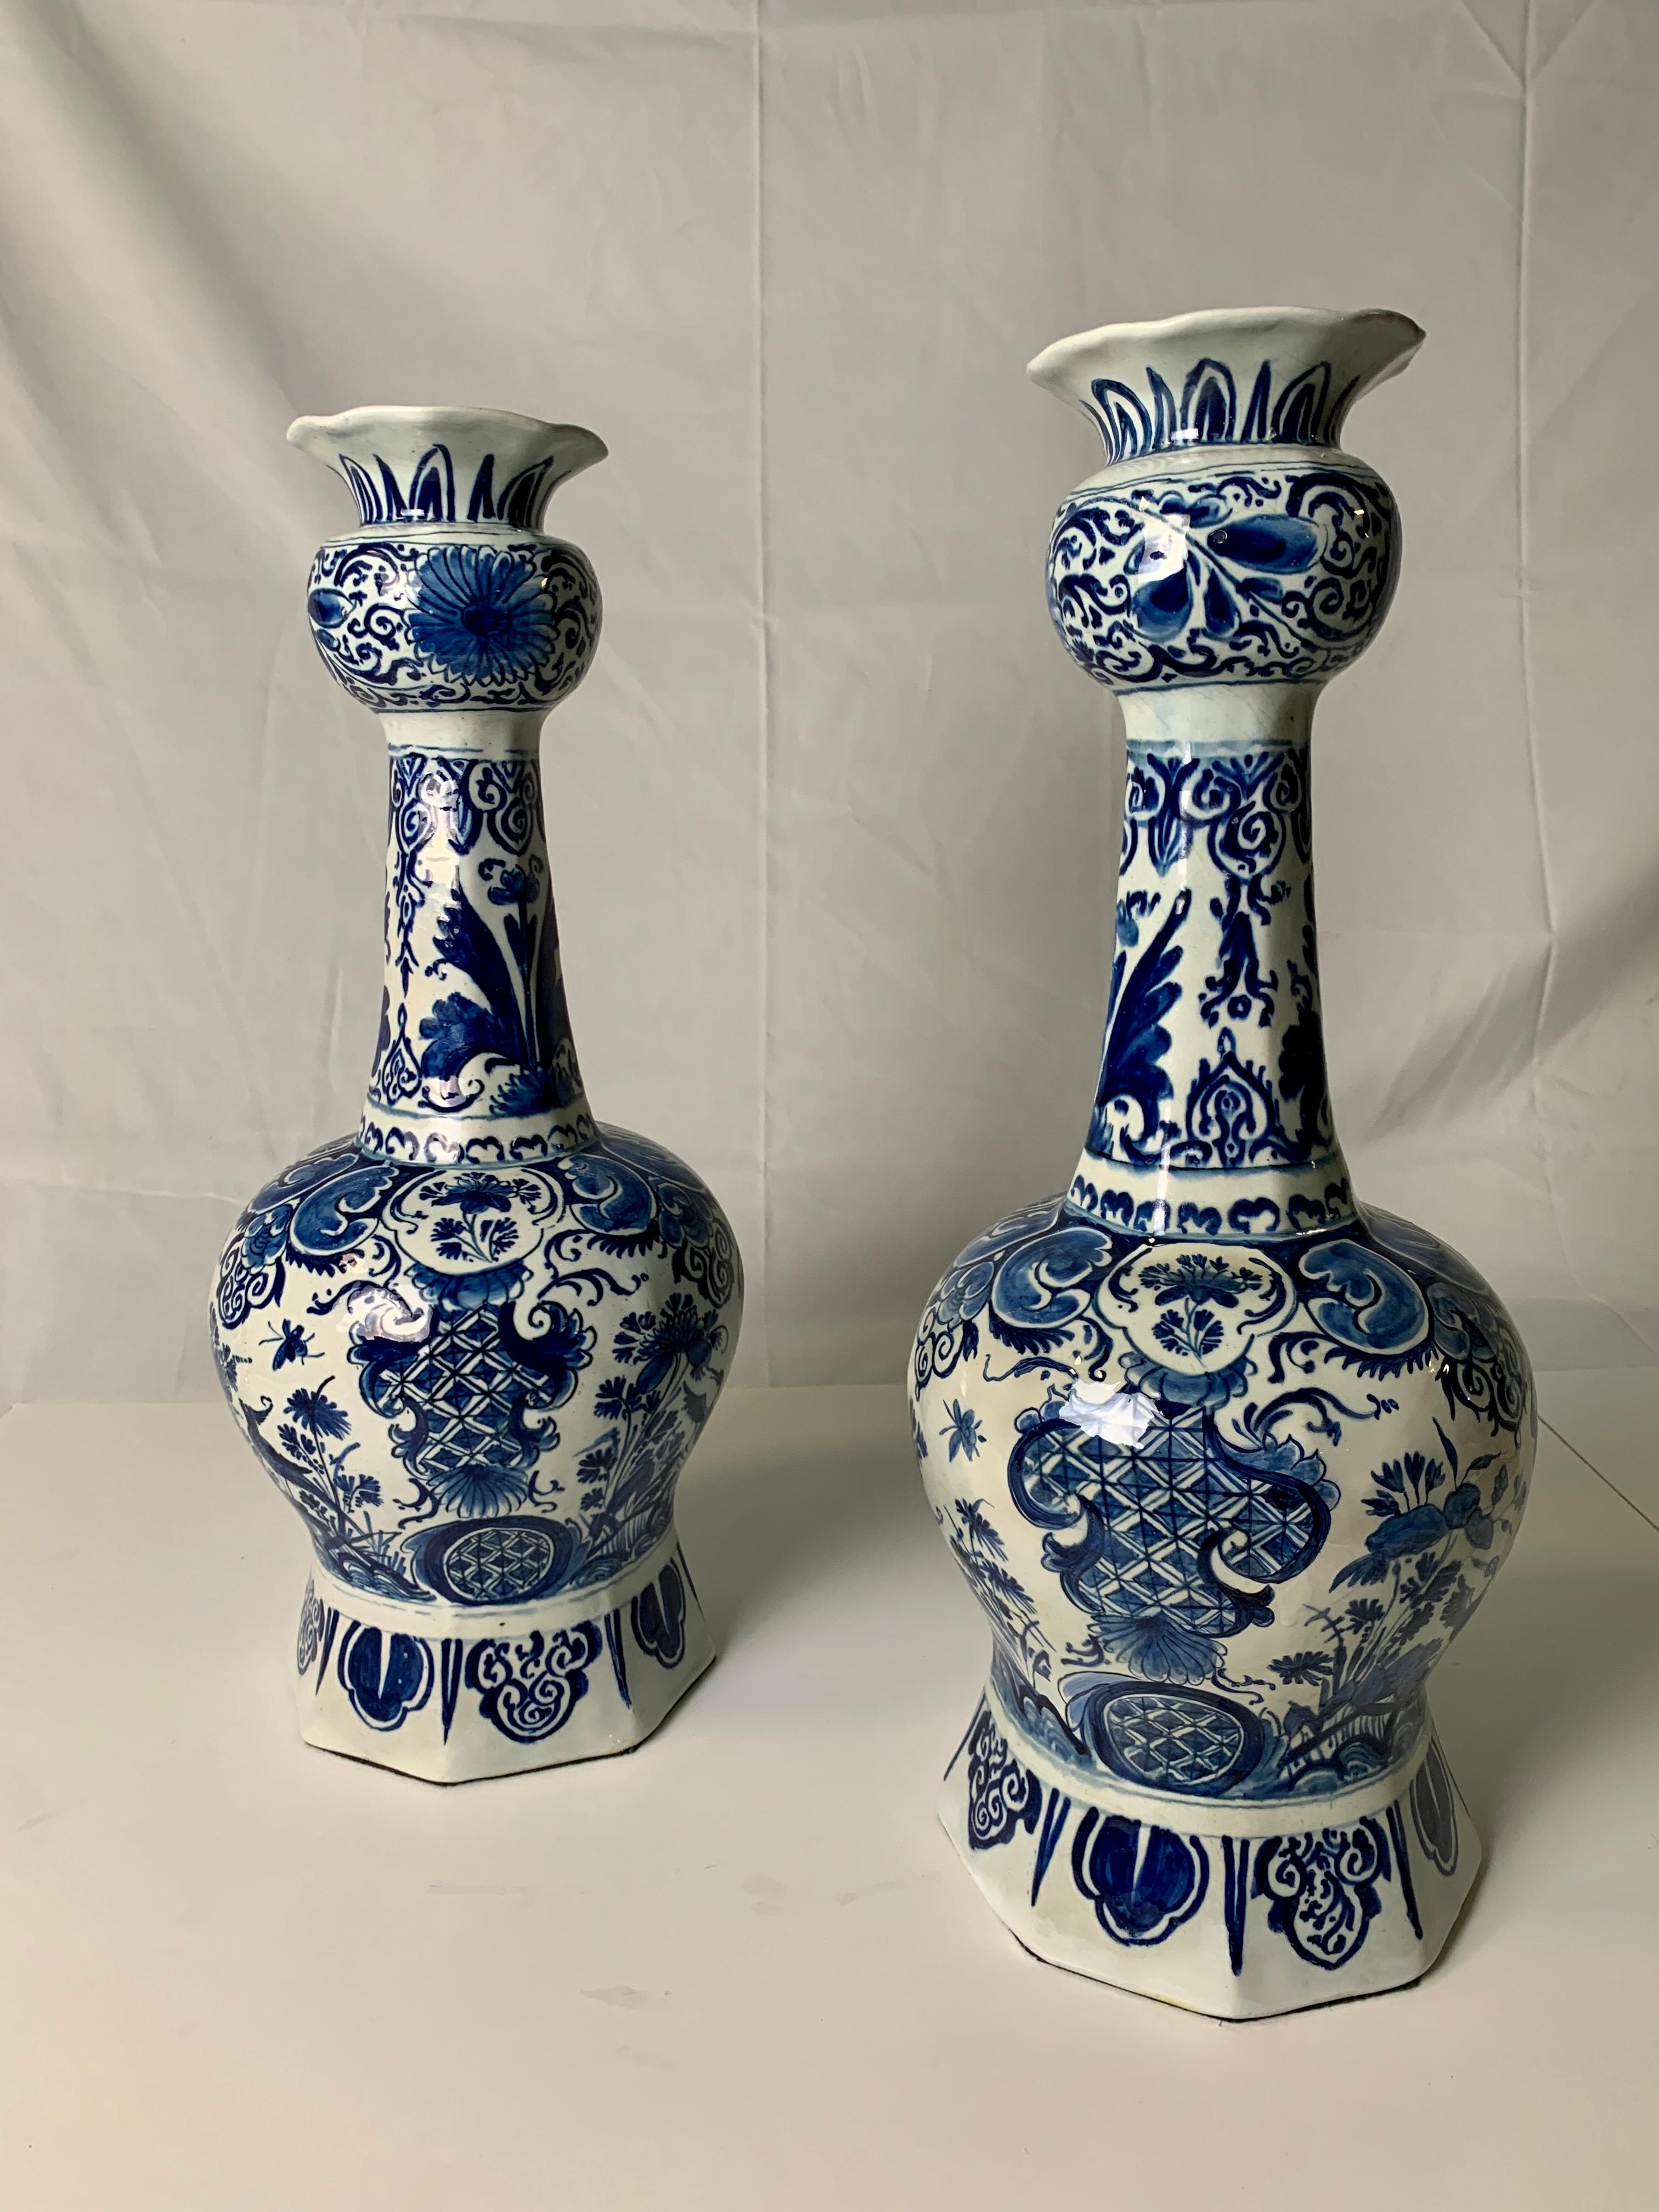 This pair of antique blue and white Dutch Delft vases was made circa 1770. Each vase has four panels with traditional decorations showing garden scenes filled with flowers and songbirds. They have long octagonal necks decorated with scrolling vines